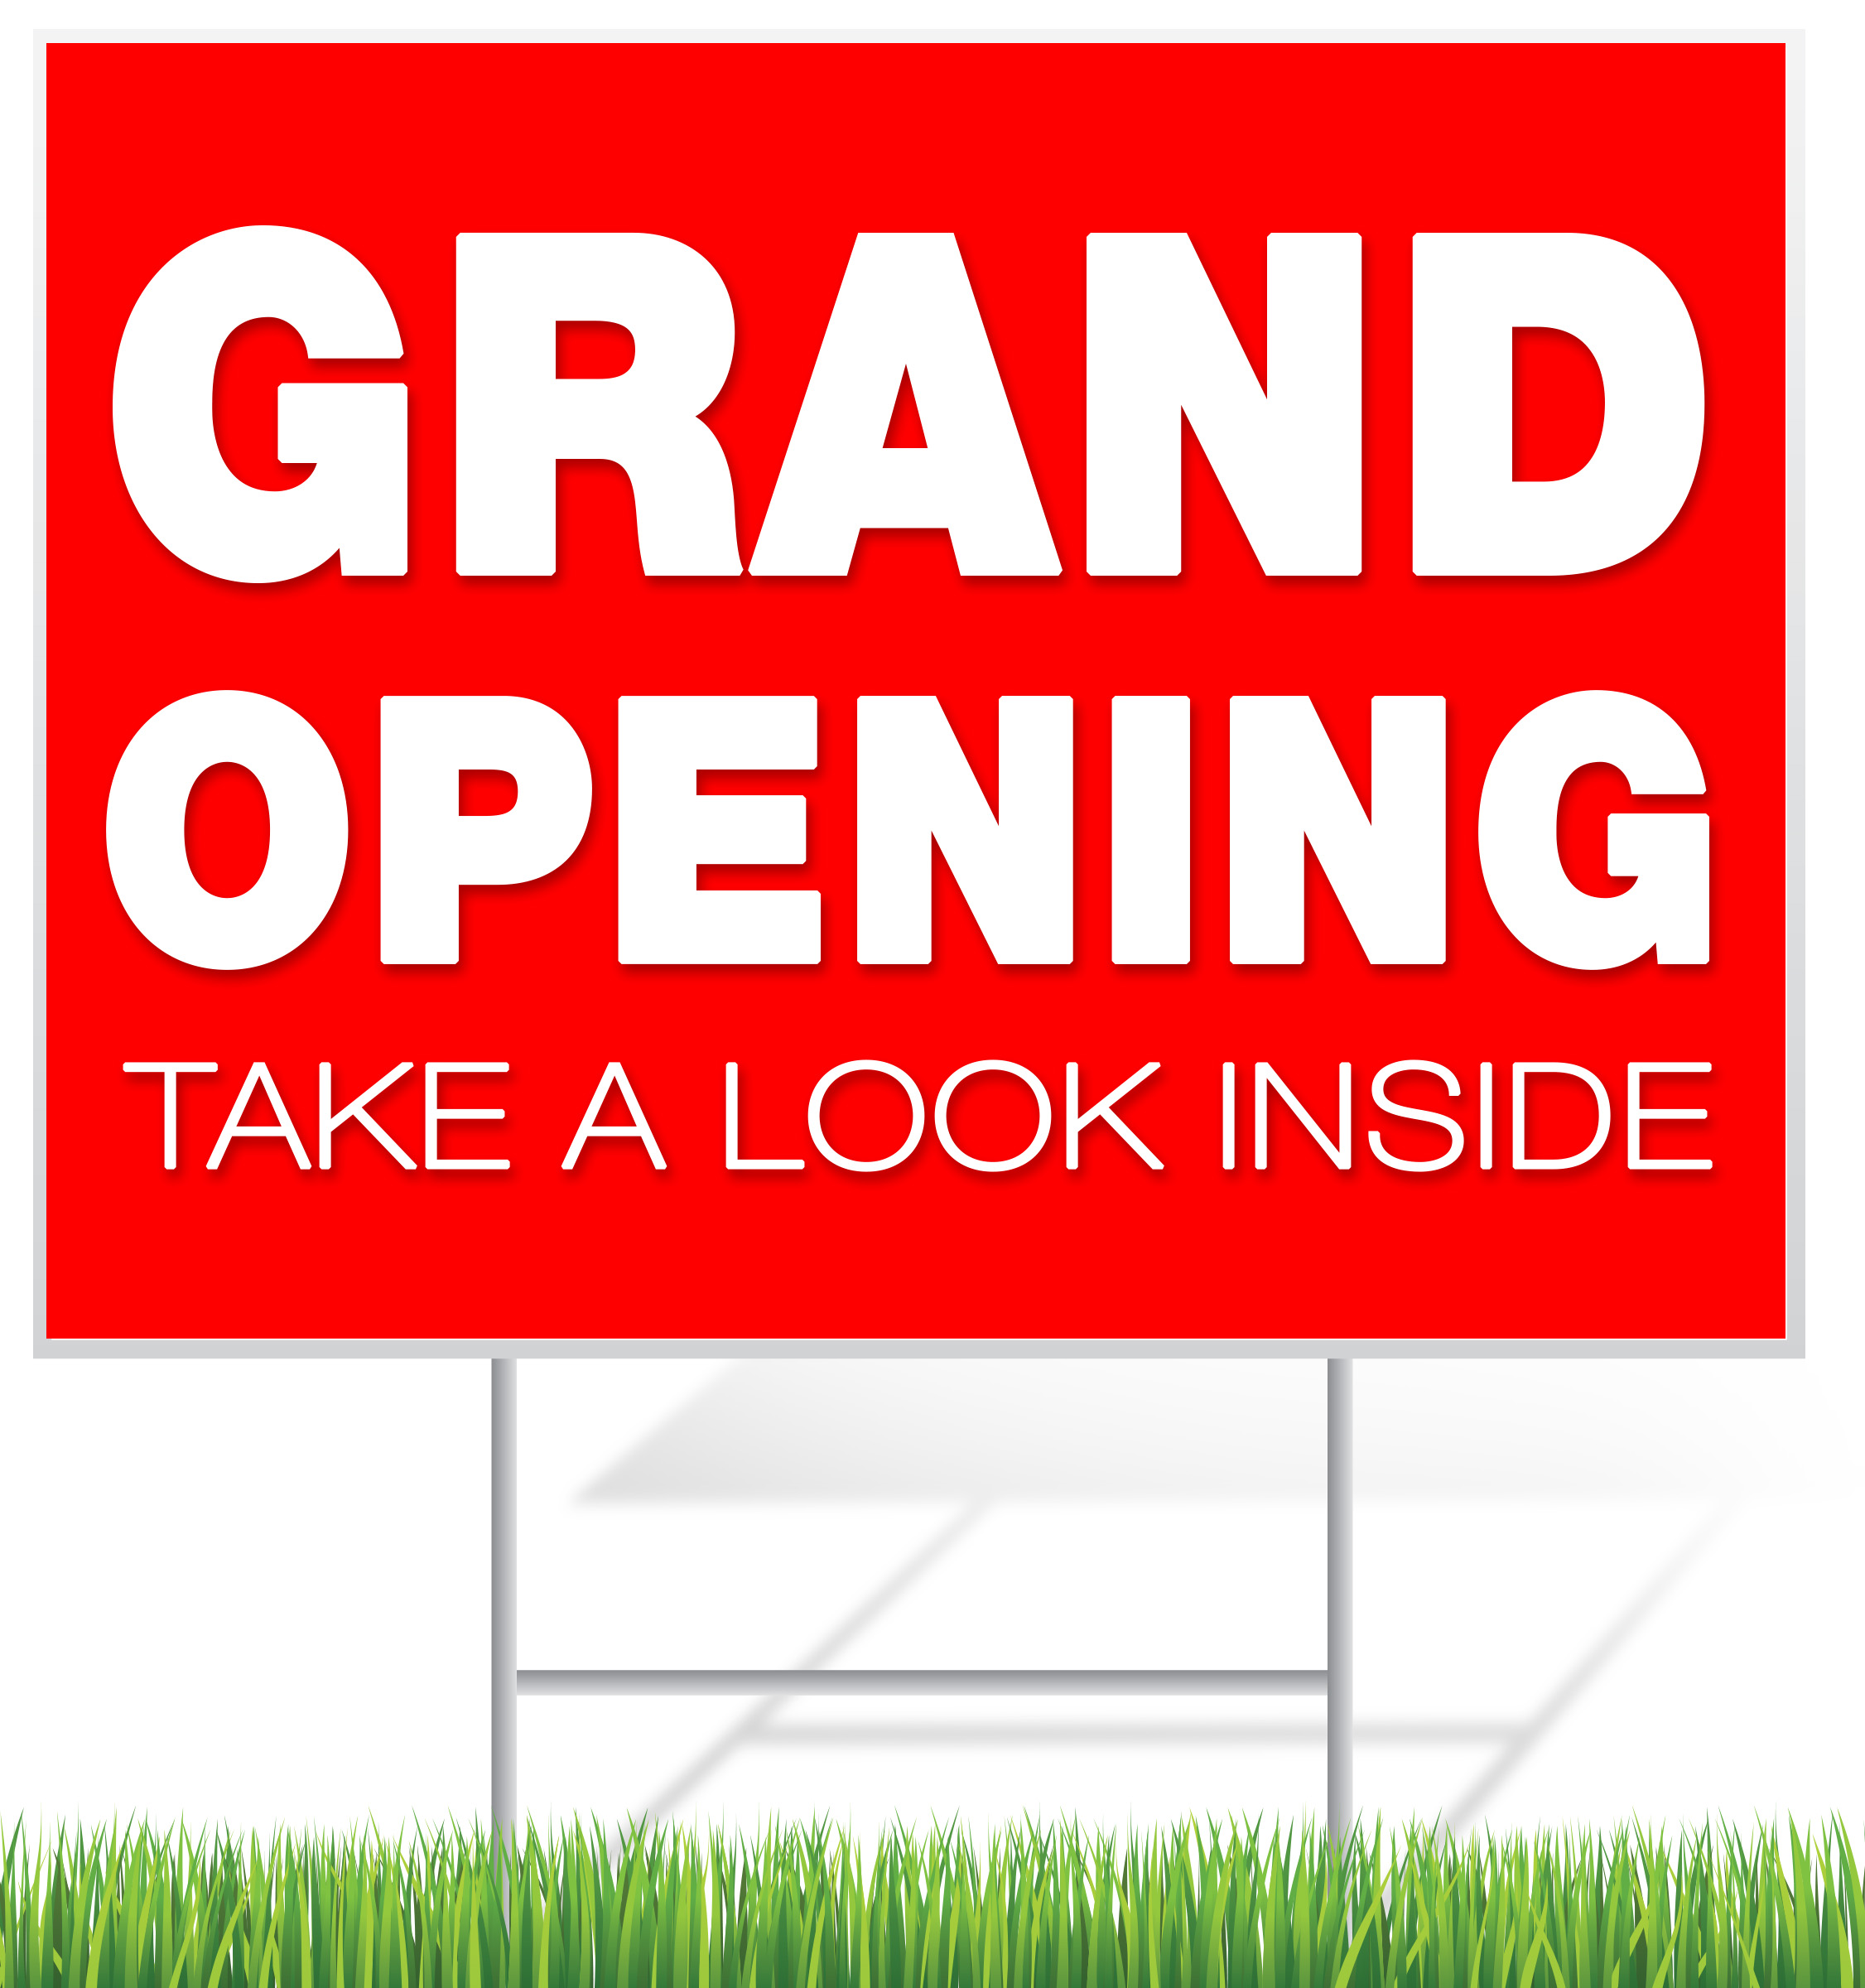 Grand Opening Lawn Sign Example | LawnSigns.com